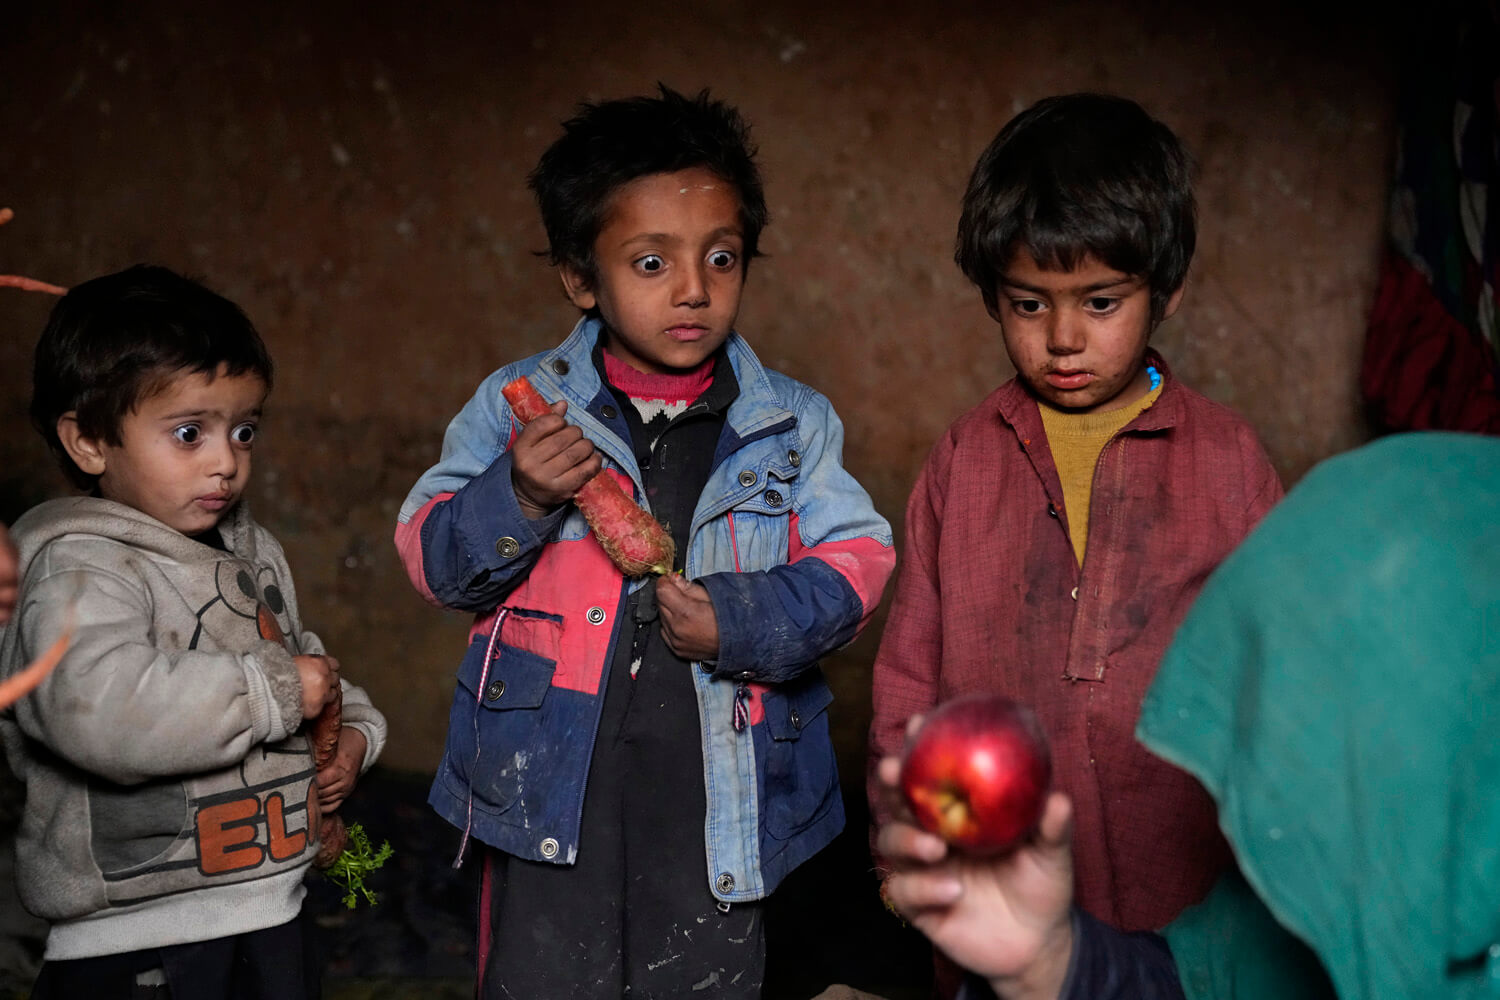 Three young children stare at a shiny red apple with expressions of bewilderment and curiosity with a dimly lit, impoverished backdrop.